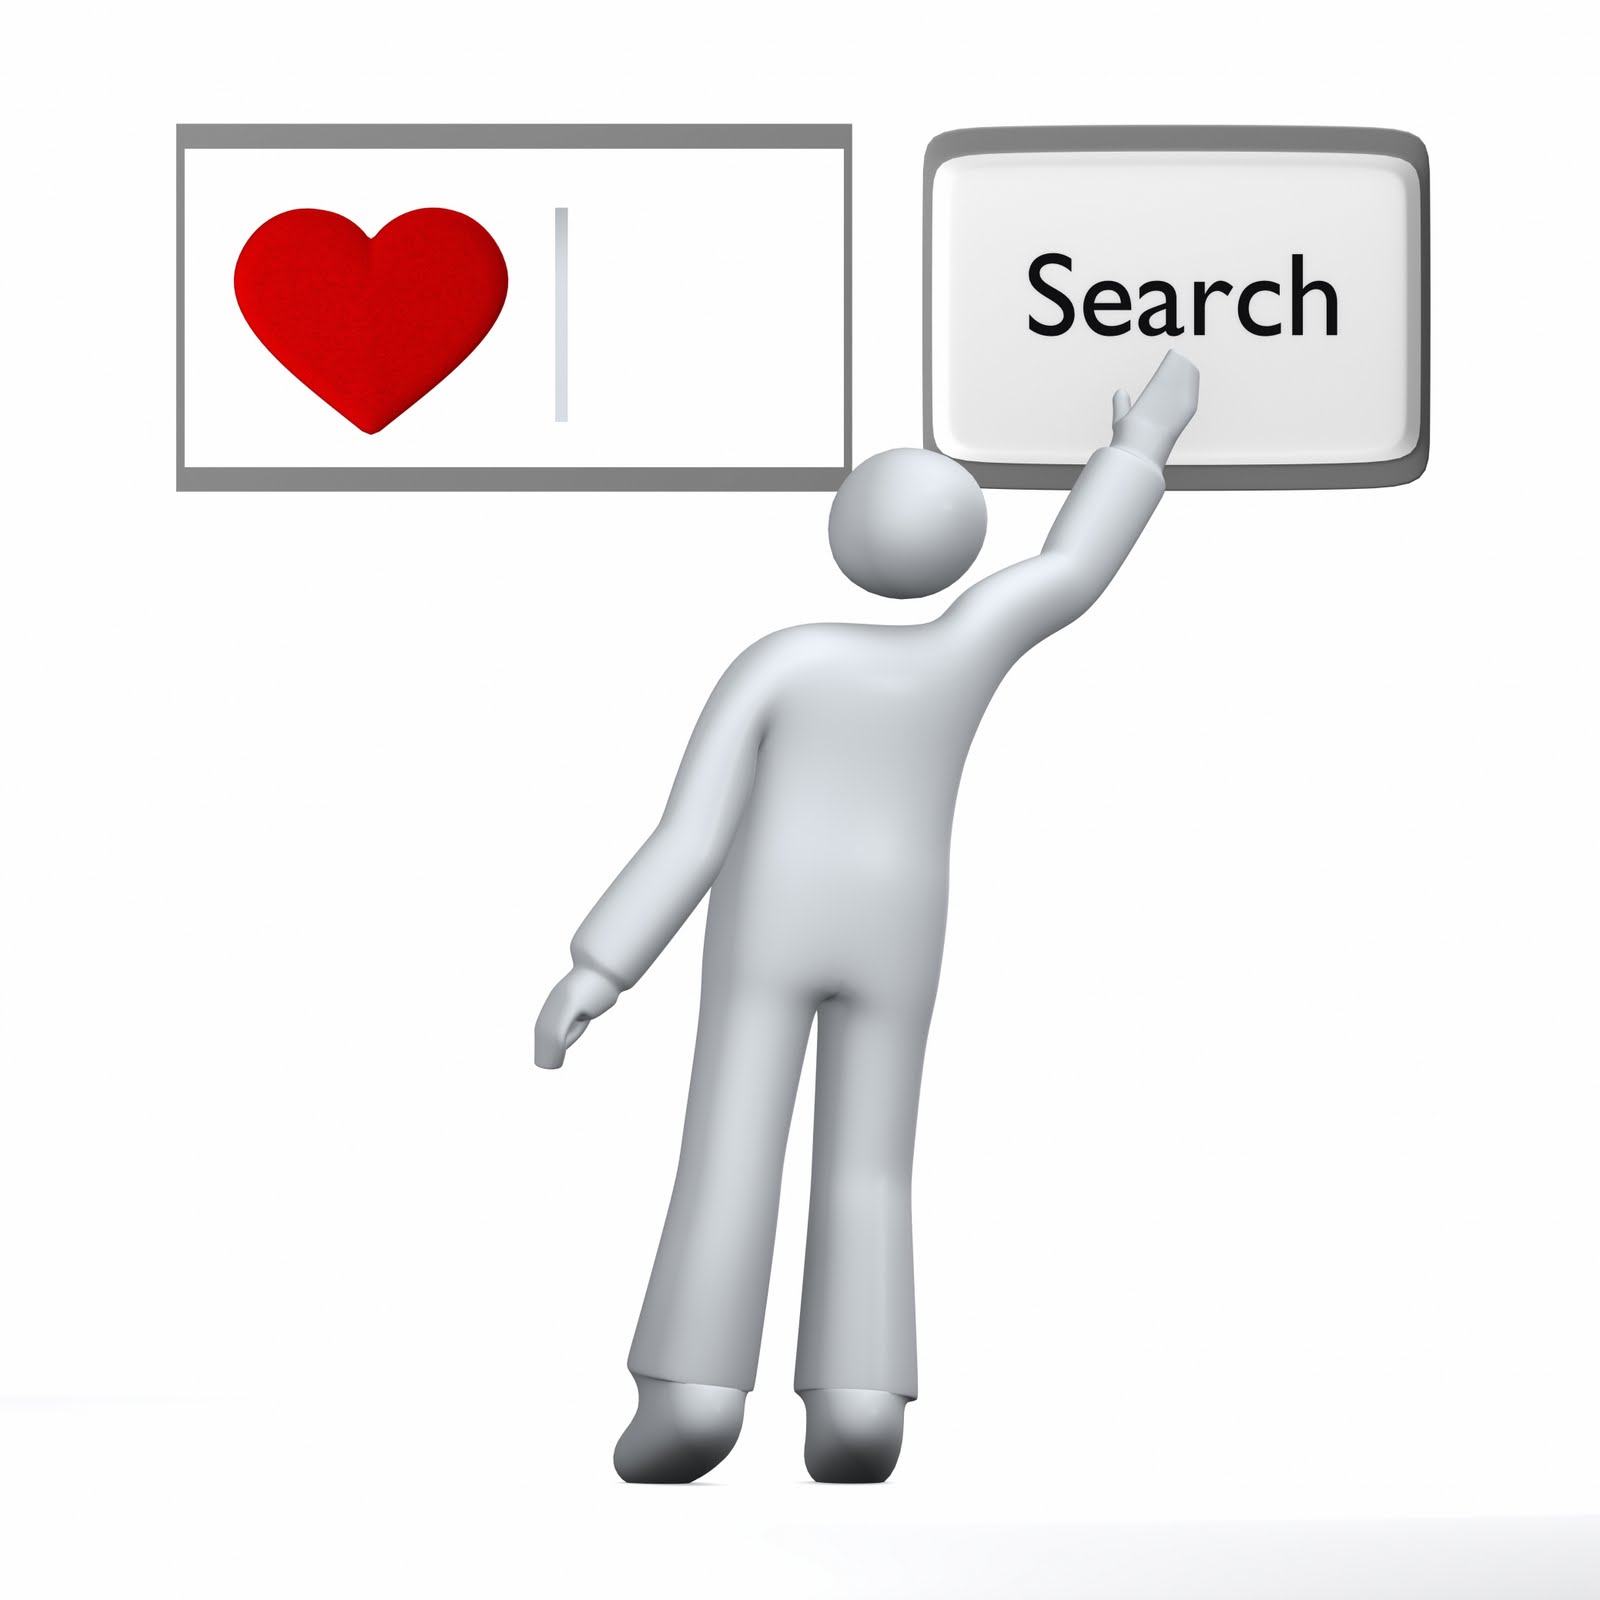 Search for your Love на русском. Searching of Love. Search Love зипка. Search for lover. Быстро лов